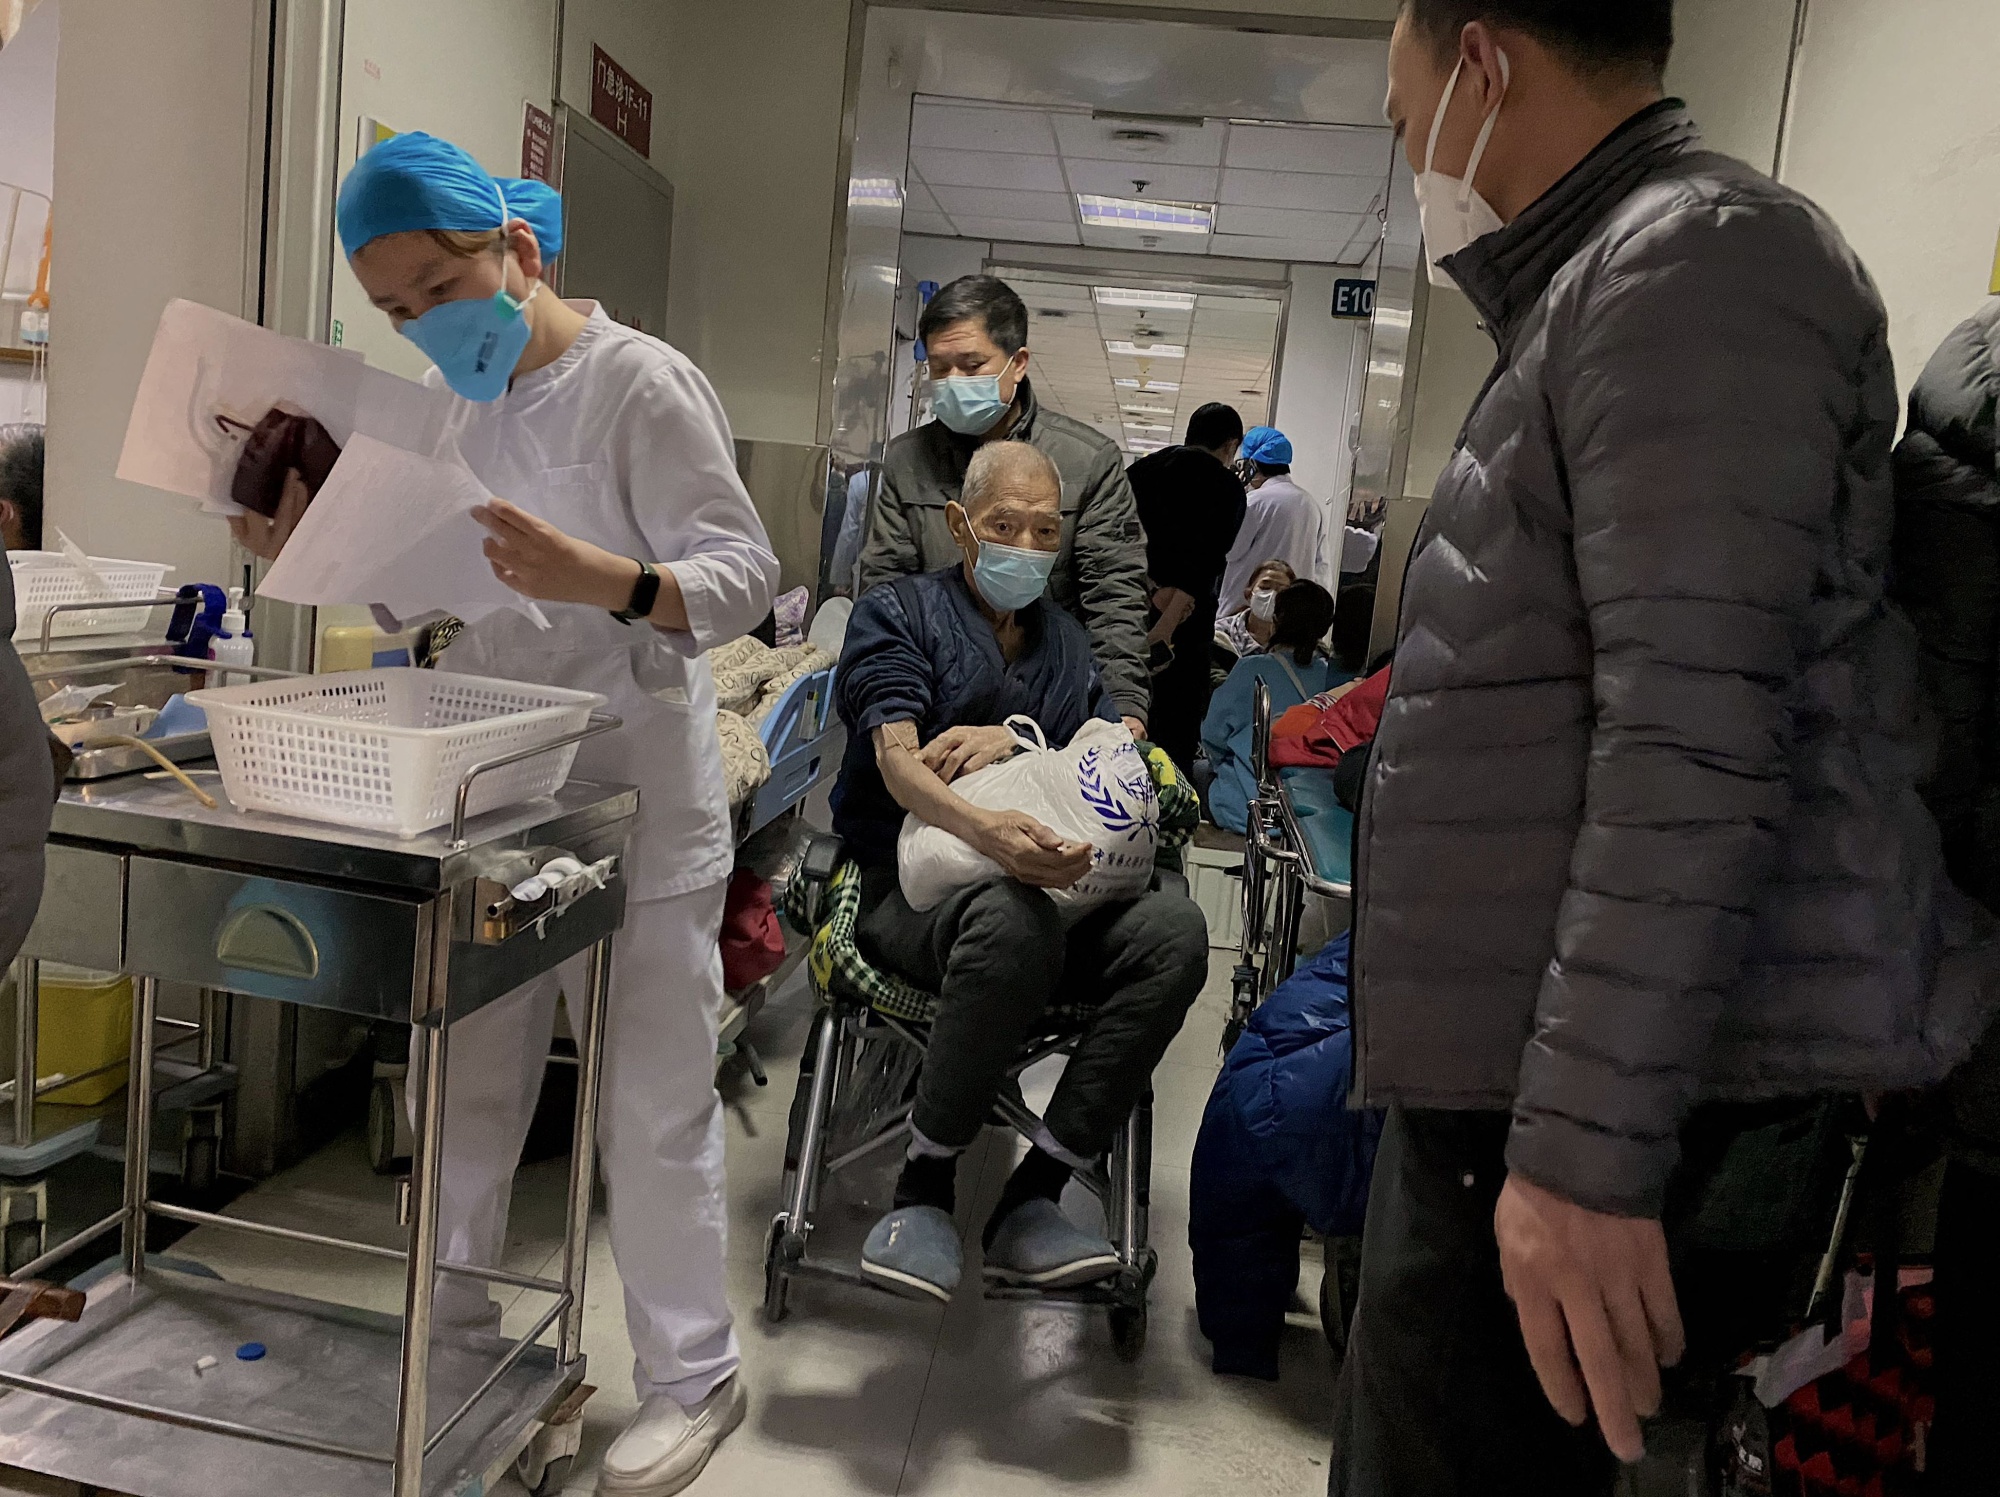 A Covid-19 patient being moved on a wheelchair at Tianjin First Center Hospital in Tianjin, China.&nbsp;Cities across China have struggled with surging infections, a resulting shortage of pharmaceuticals and overflowing hospital wards and crematoriums after Xi Jinping suddenly dismantled his “Covid zero” lockdown and testing regime.&nbsp;